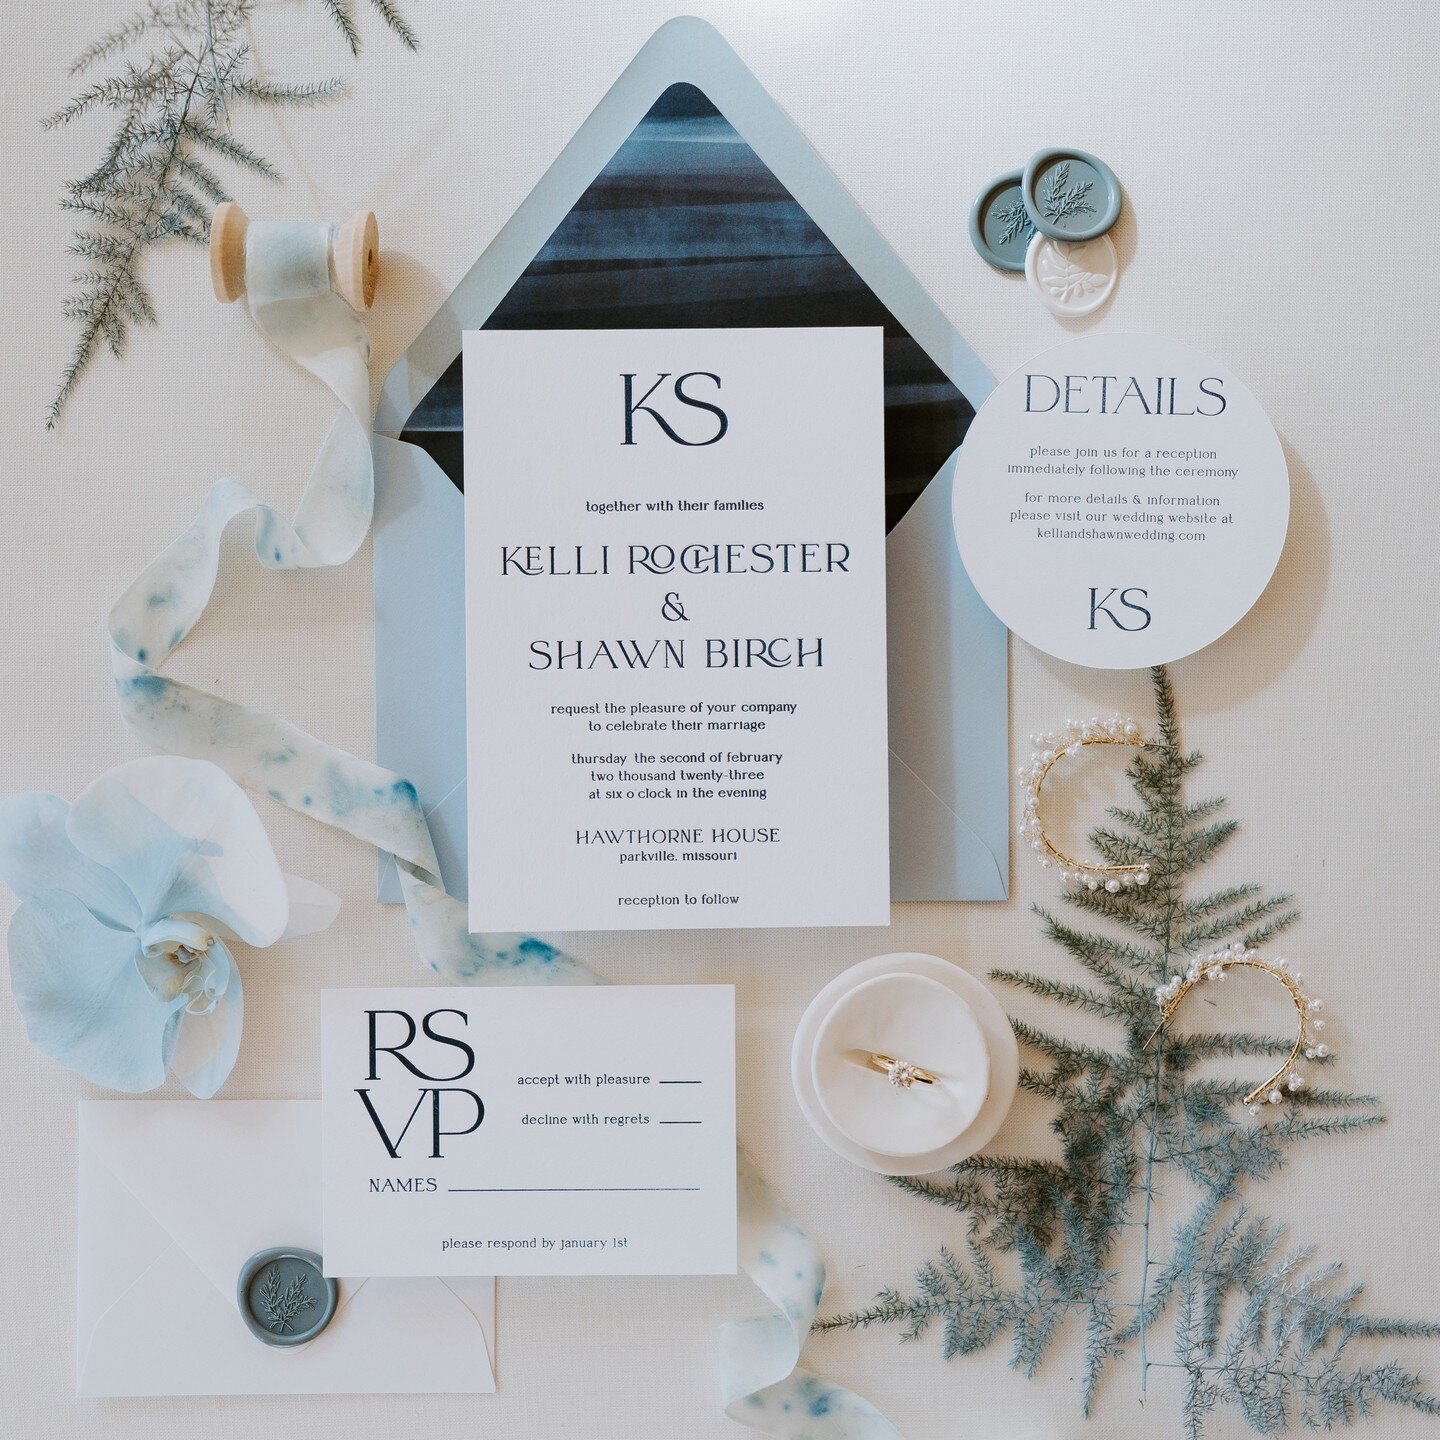 Here is a sneak peek of one of our letterpress collection suites. It's simple, yet sophisticated. Perfect for modern brides. 

Production: @elitesounds 
Models: @whitneywoods 
@jagger_ables 
Makeup: @beatbywhit 
Hair: @theposhkc 
Dress: @thebridalpar